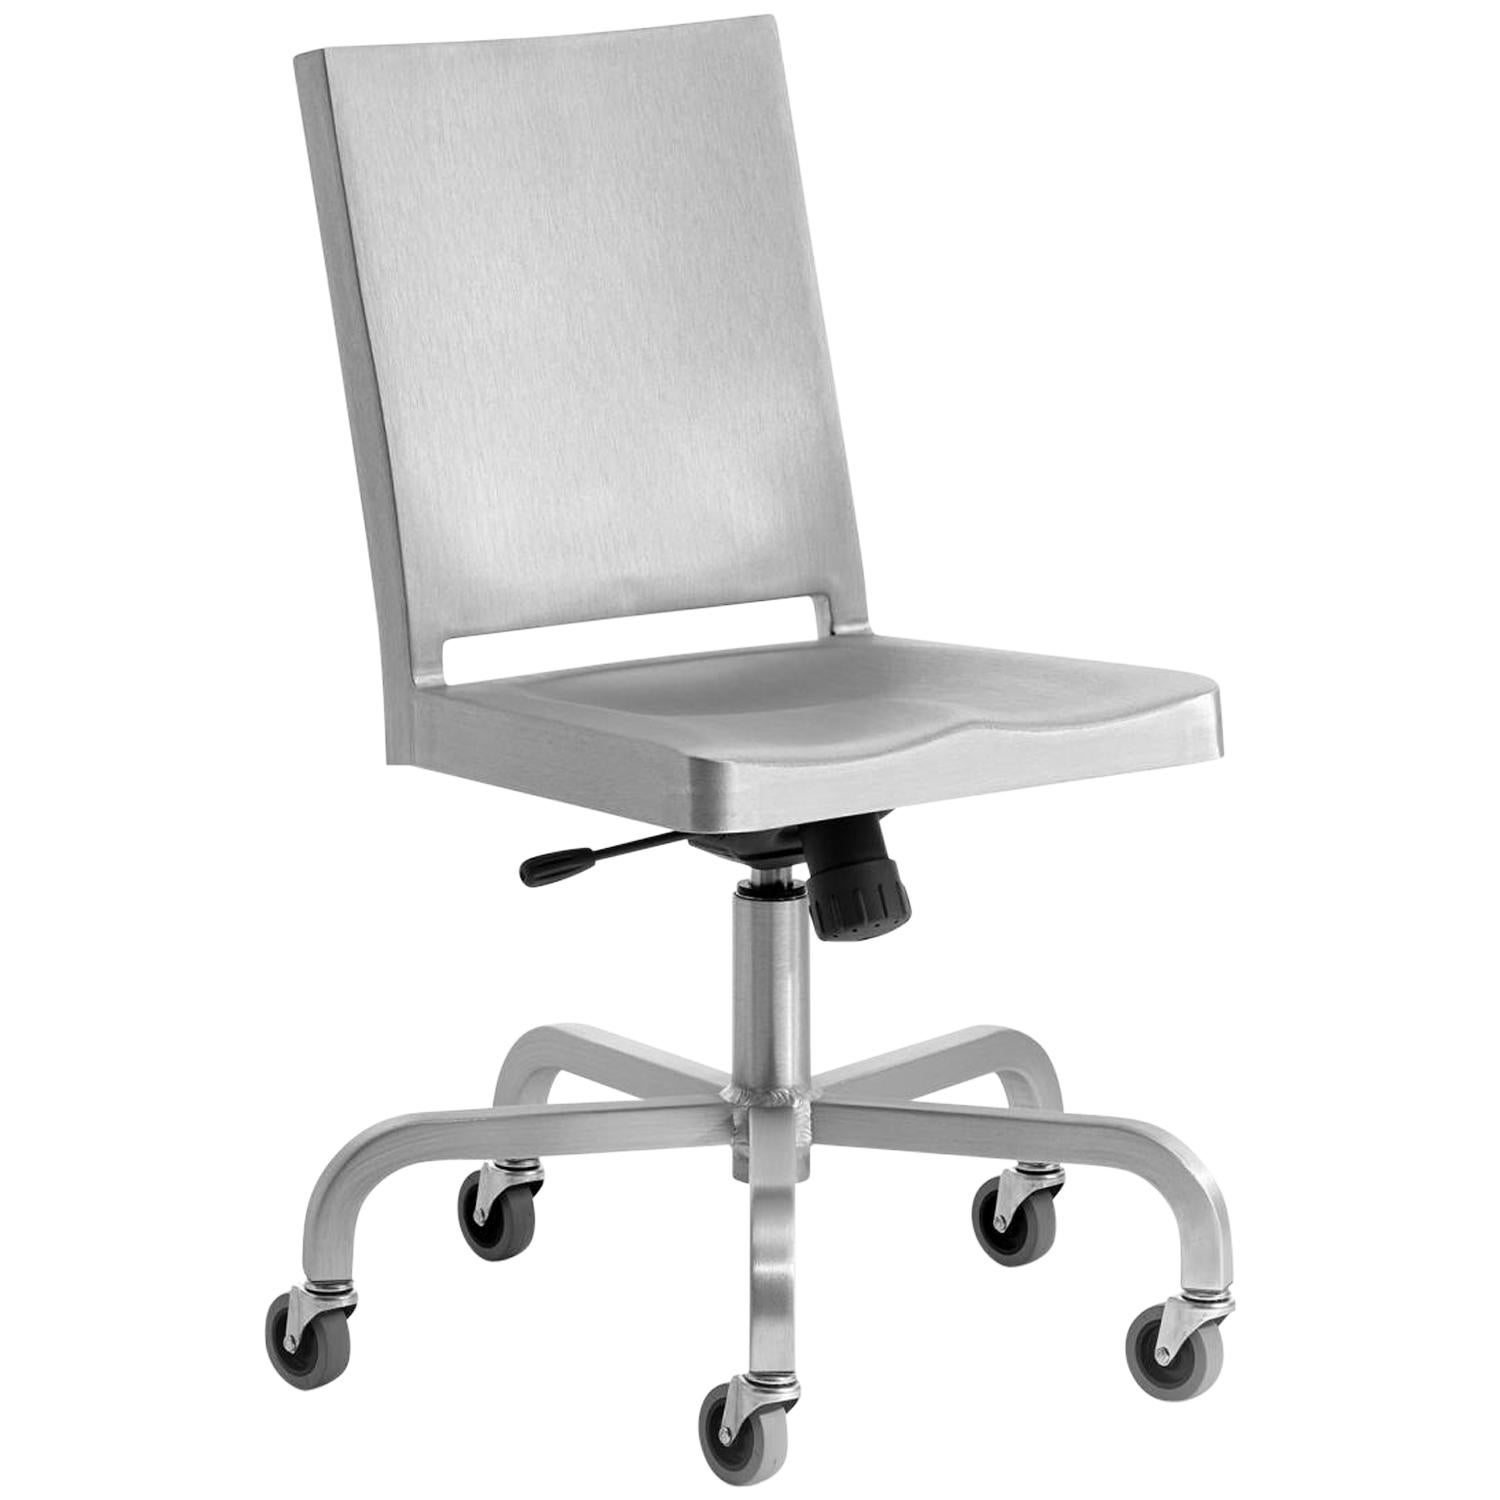 Emeco Hudson Swivel Chair in Brushed Aluminum by Philippe Starck